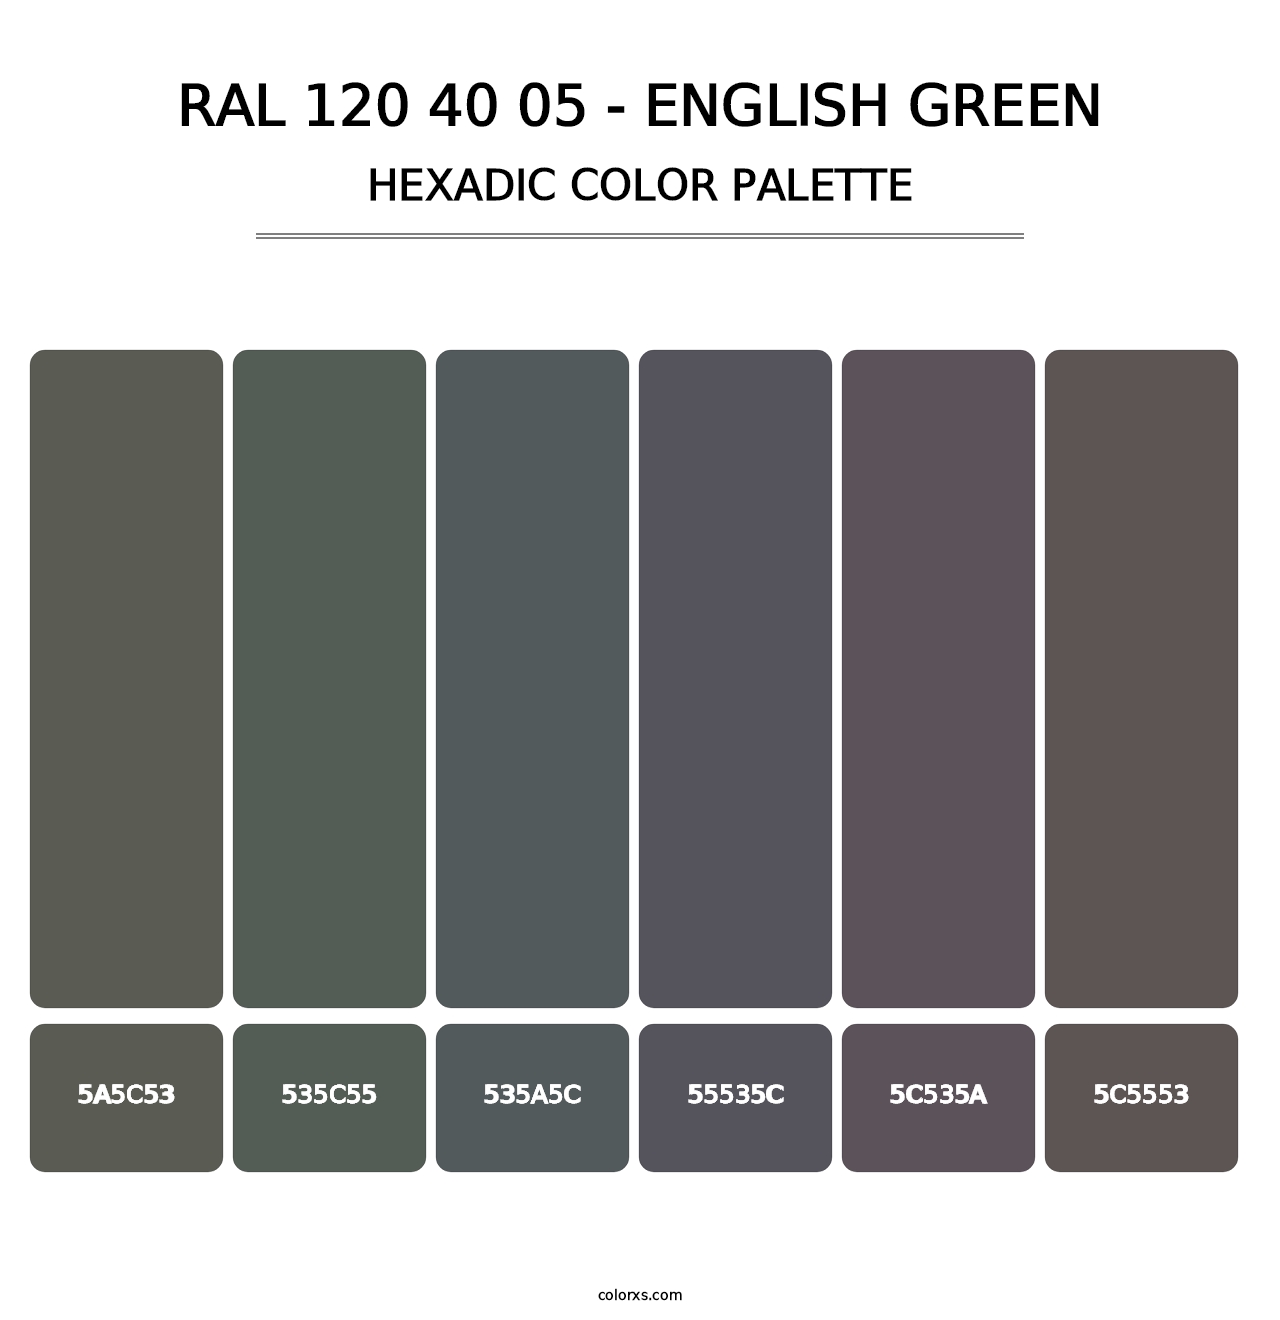 RAL 120 40 05 - English Green - Hexadic Color Palette